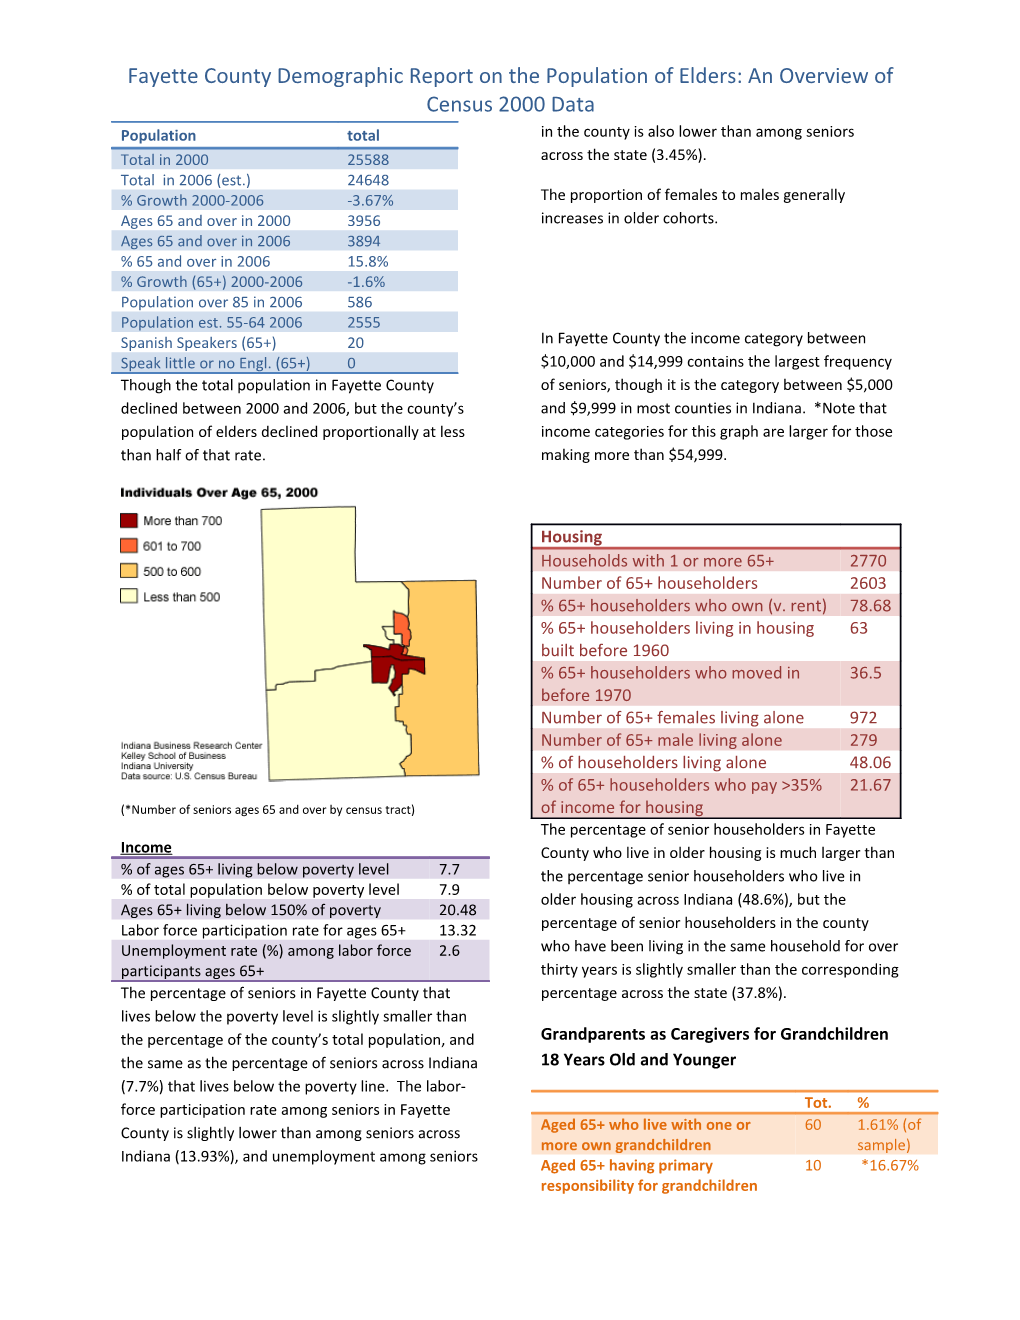 Fayette County Demographic Report on the Population of Elders: an Overview of Census 2000 Data